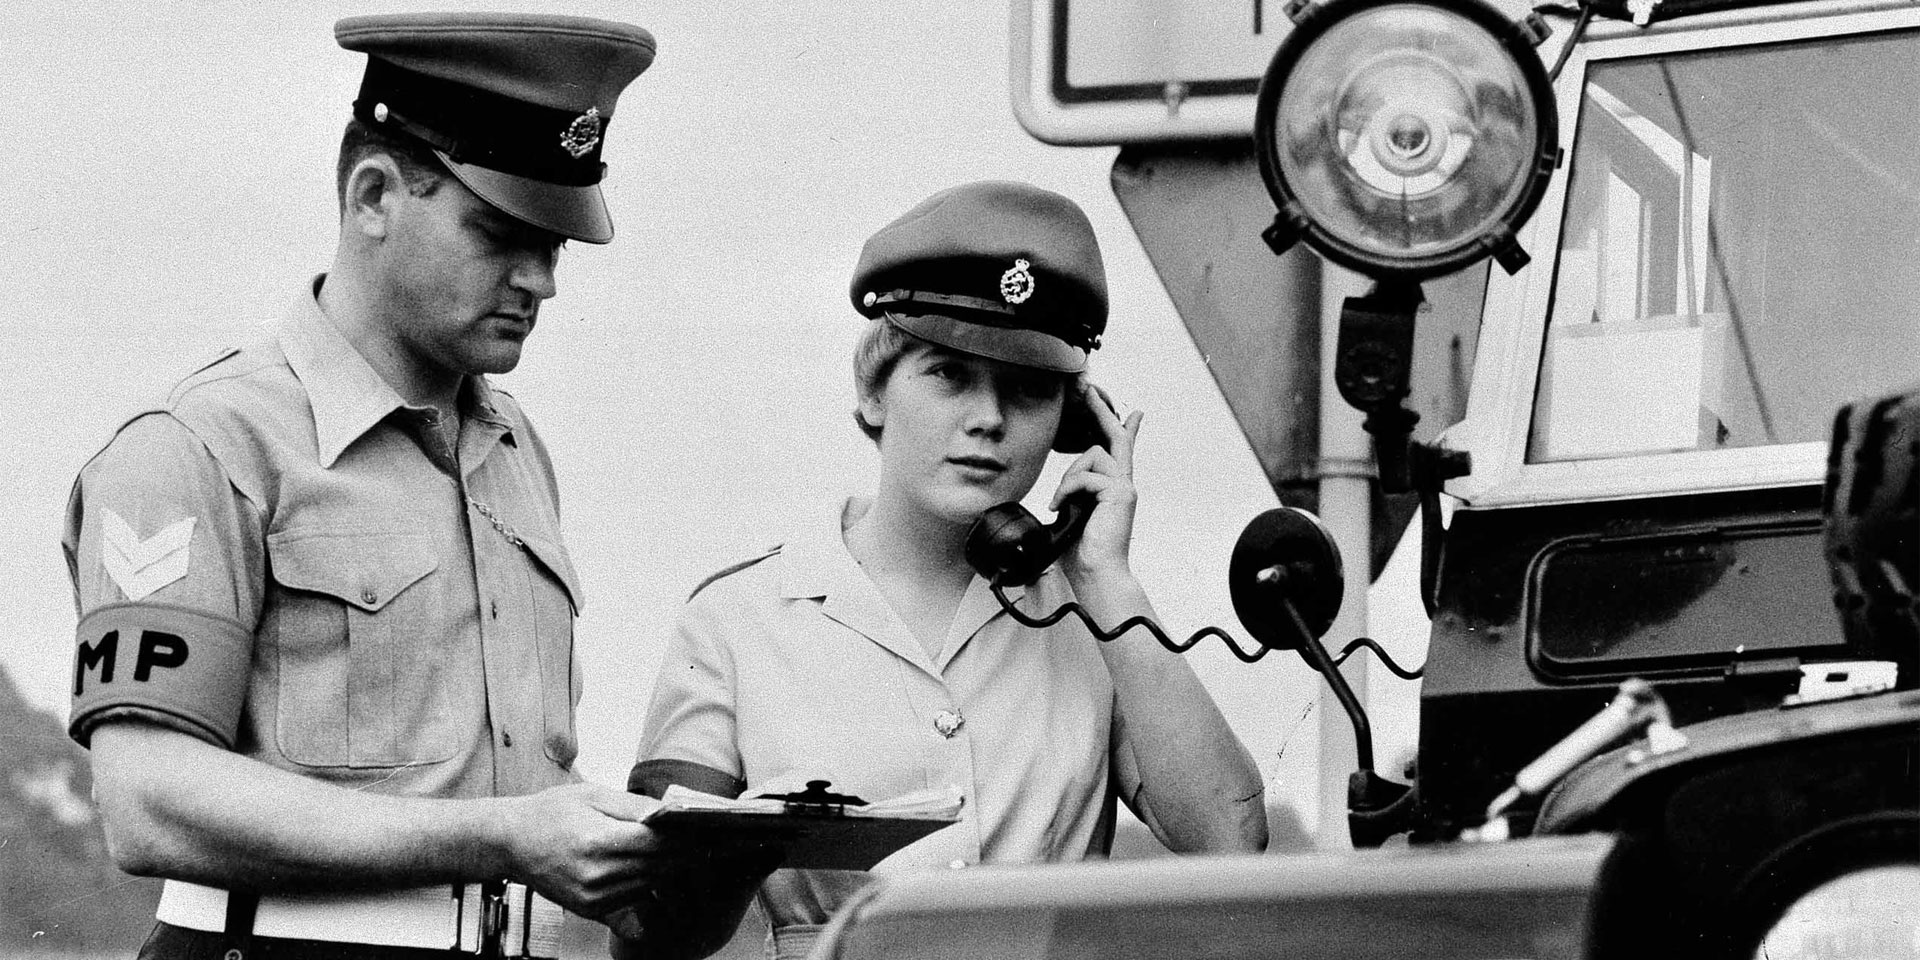 Women’s Royal Army Corps military policewoman on duty in Gerkerath, c1970